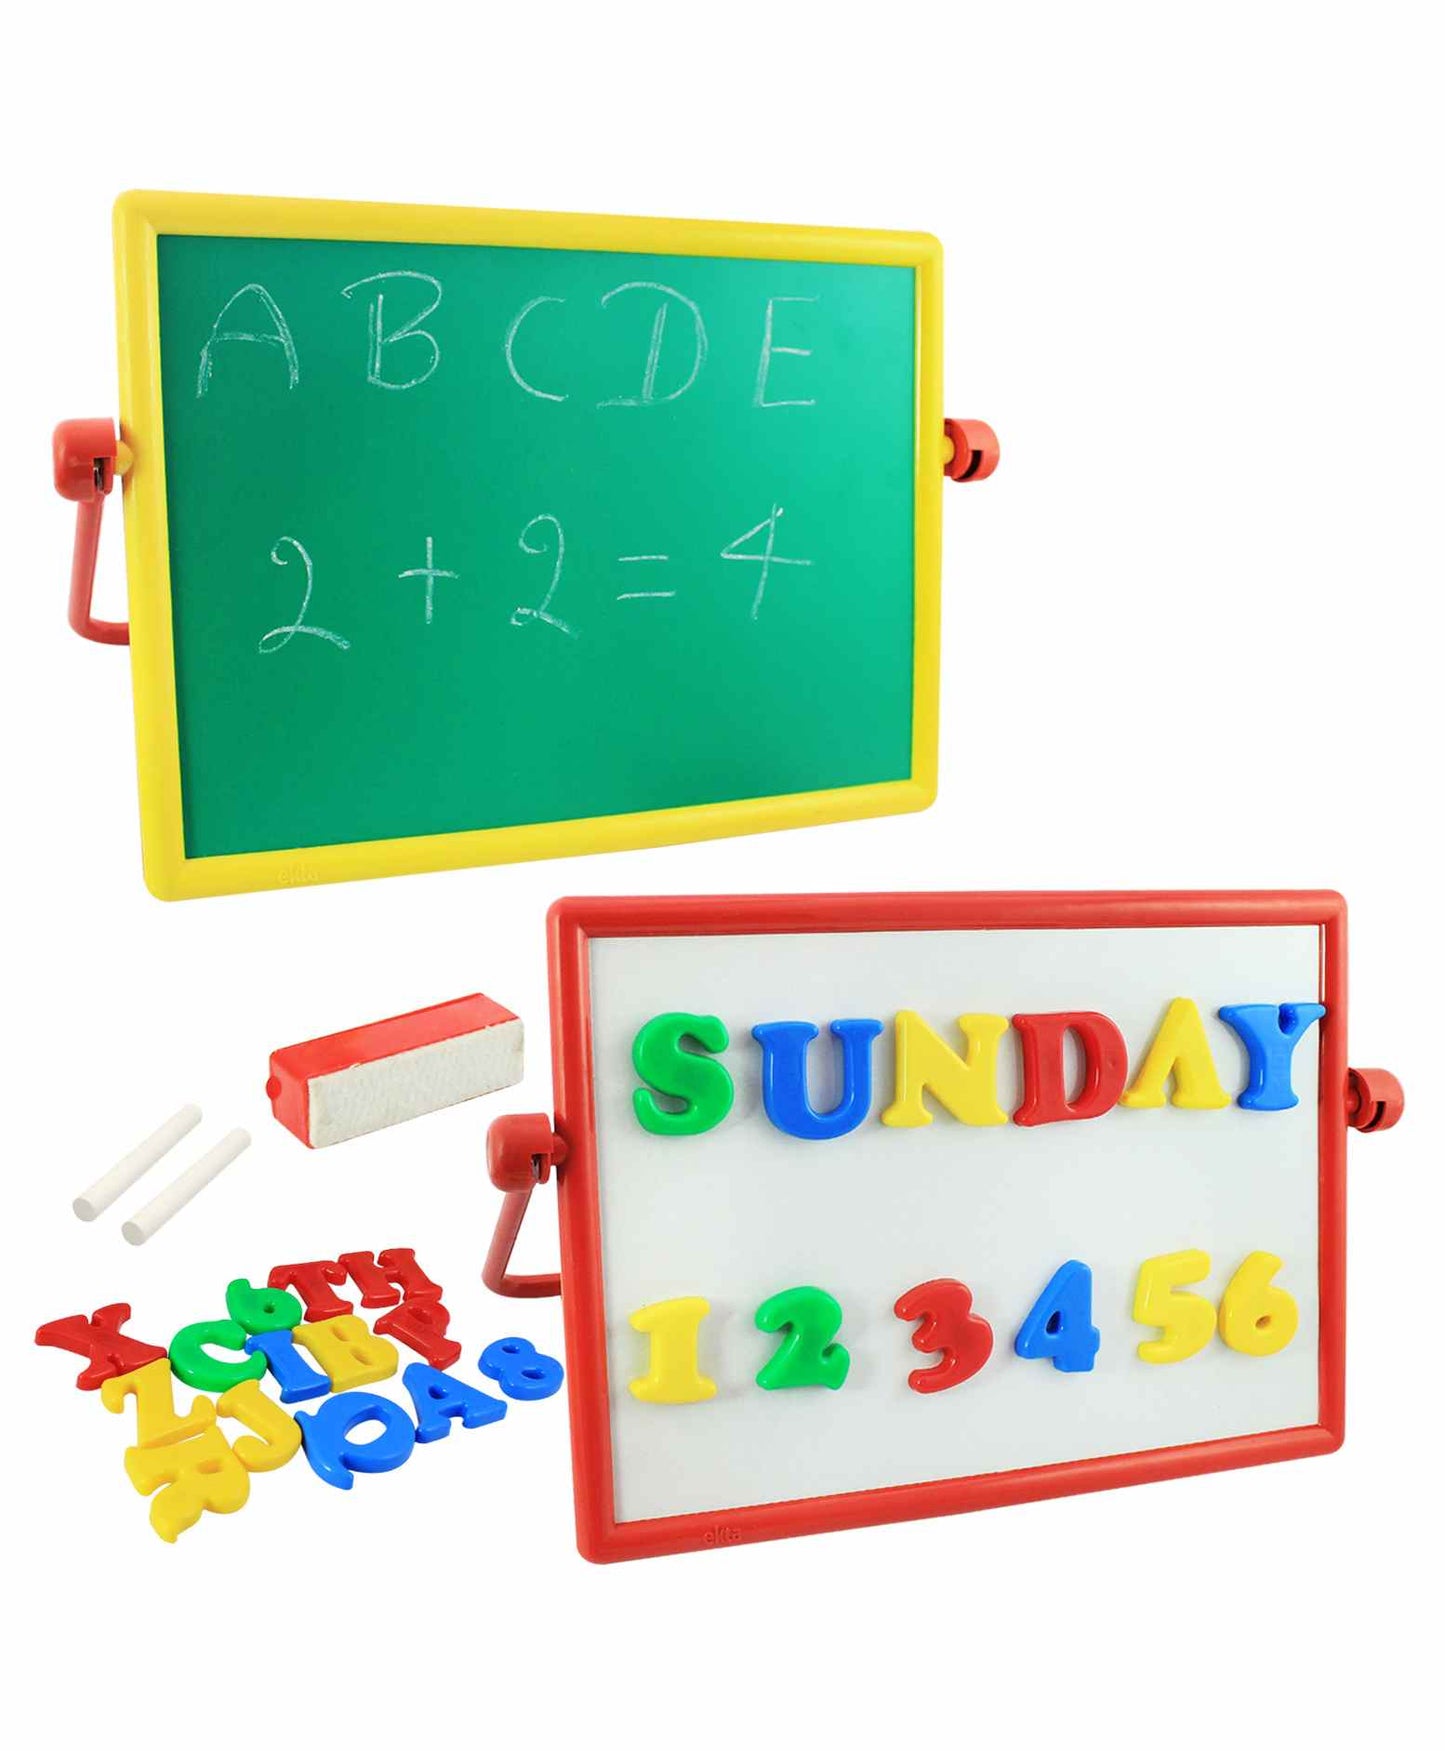 EKTA 2-in-1 Numero Board: Magnetic Alphabets, Numbers, Whiteboard & Chalkboard, Multi-Functional Learning Tool for Kids Ages 18 months -4 Years